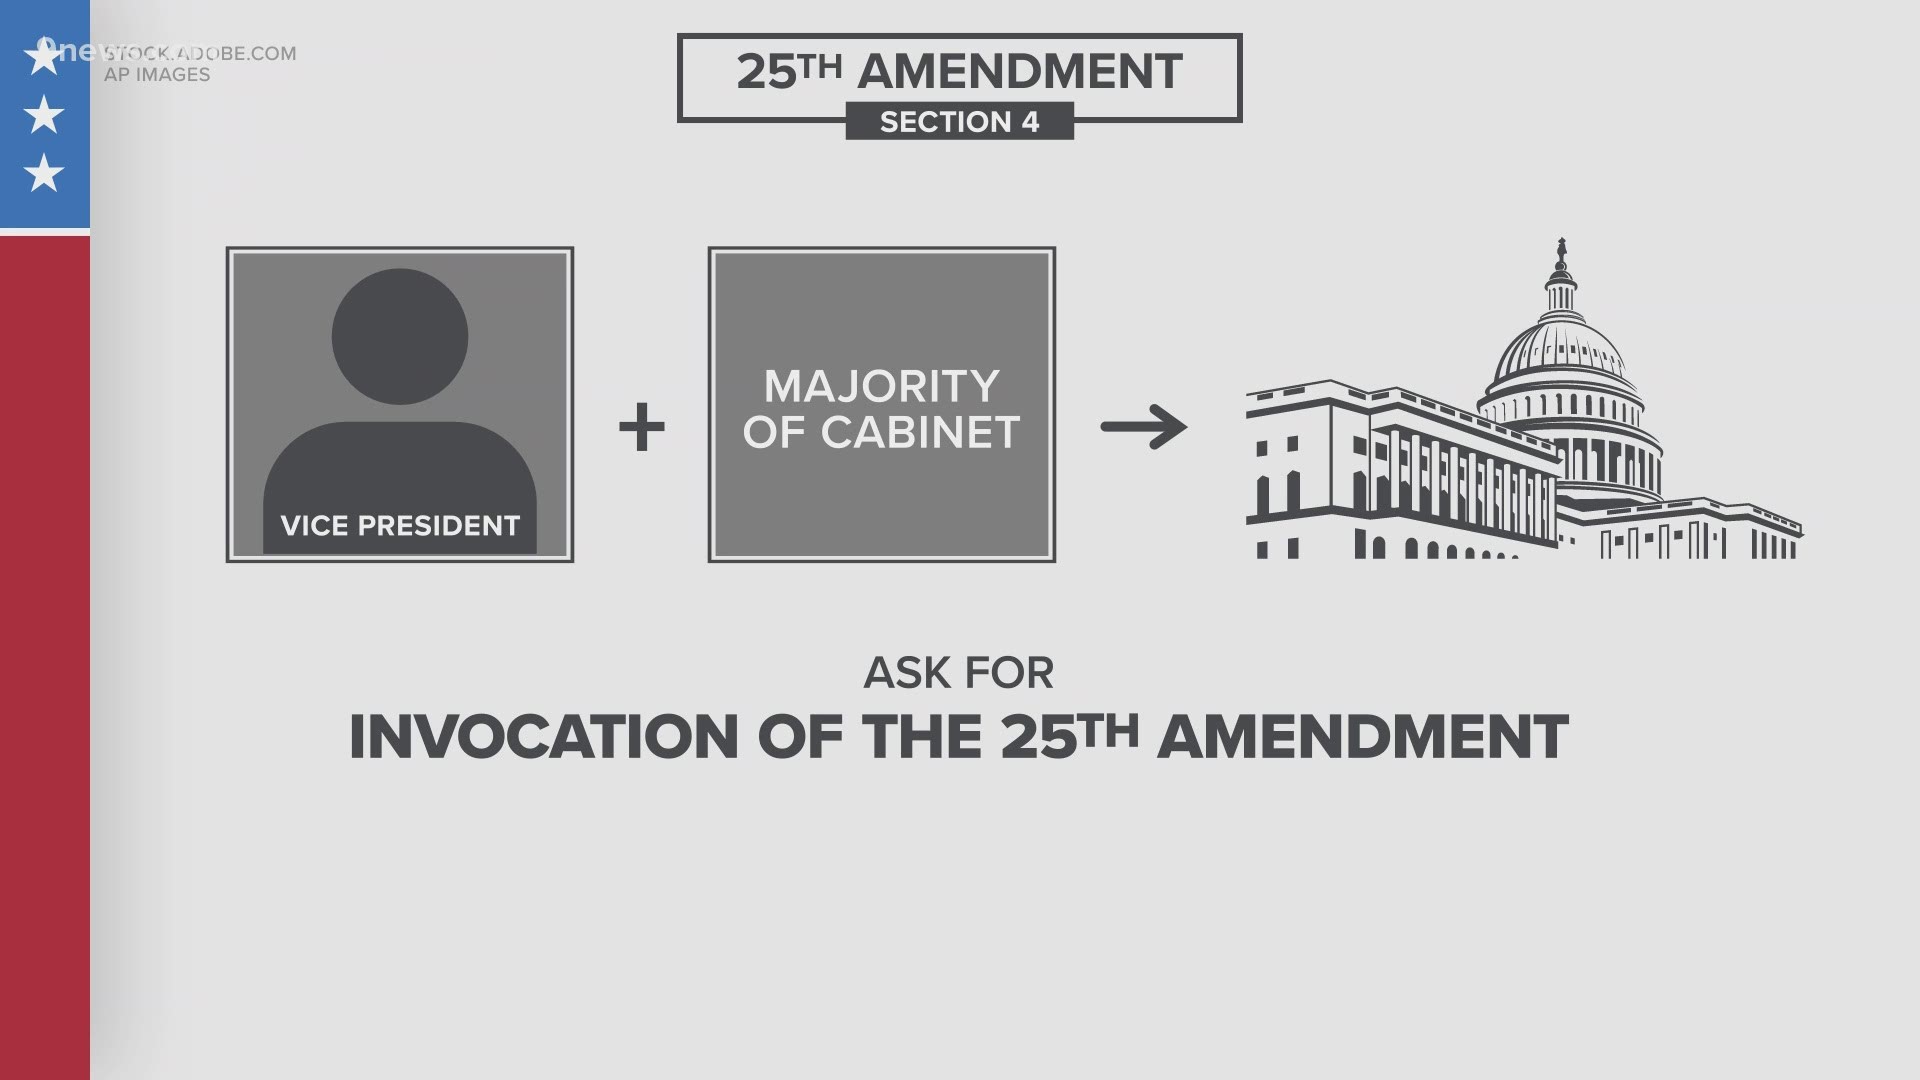 As legislators debate the merits of the 25th Amendment, we take a closer look at what it is and what it could do.